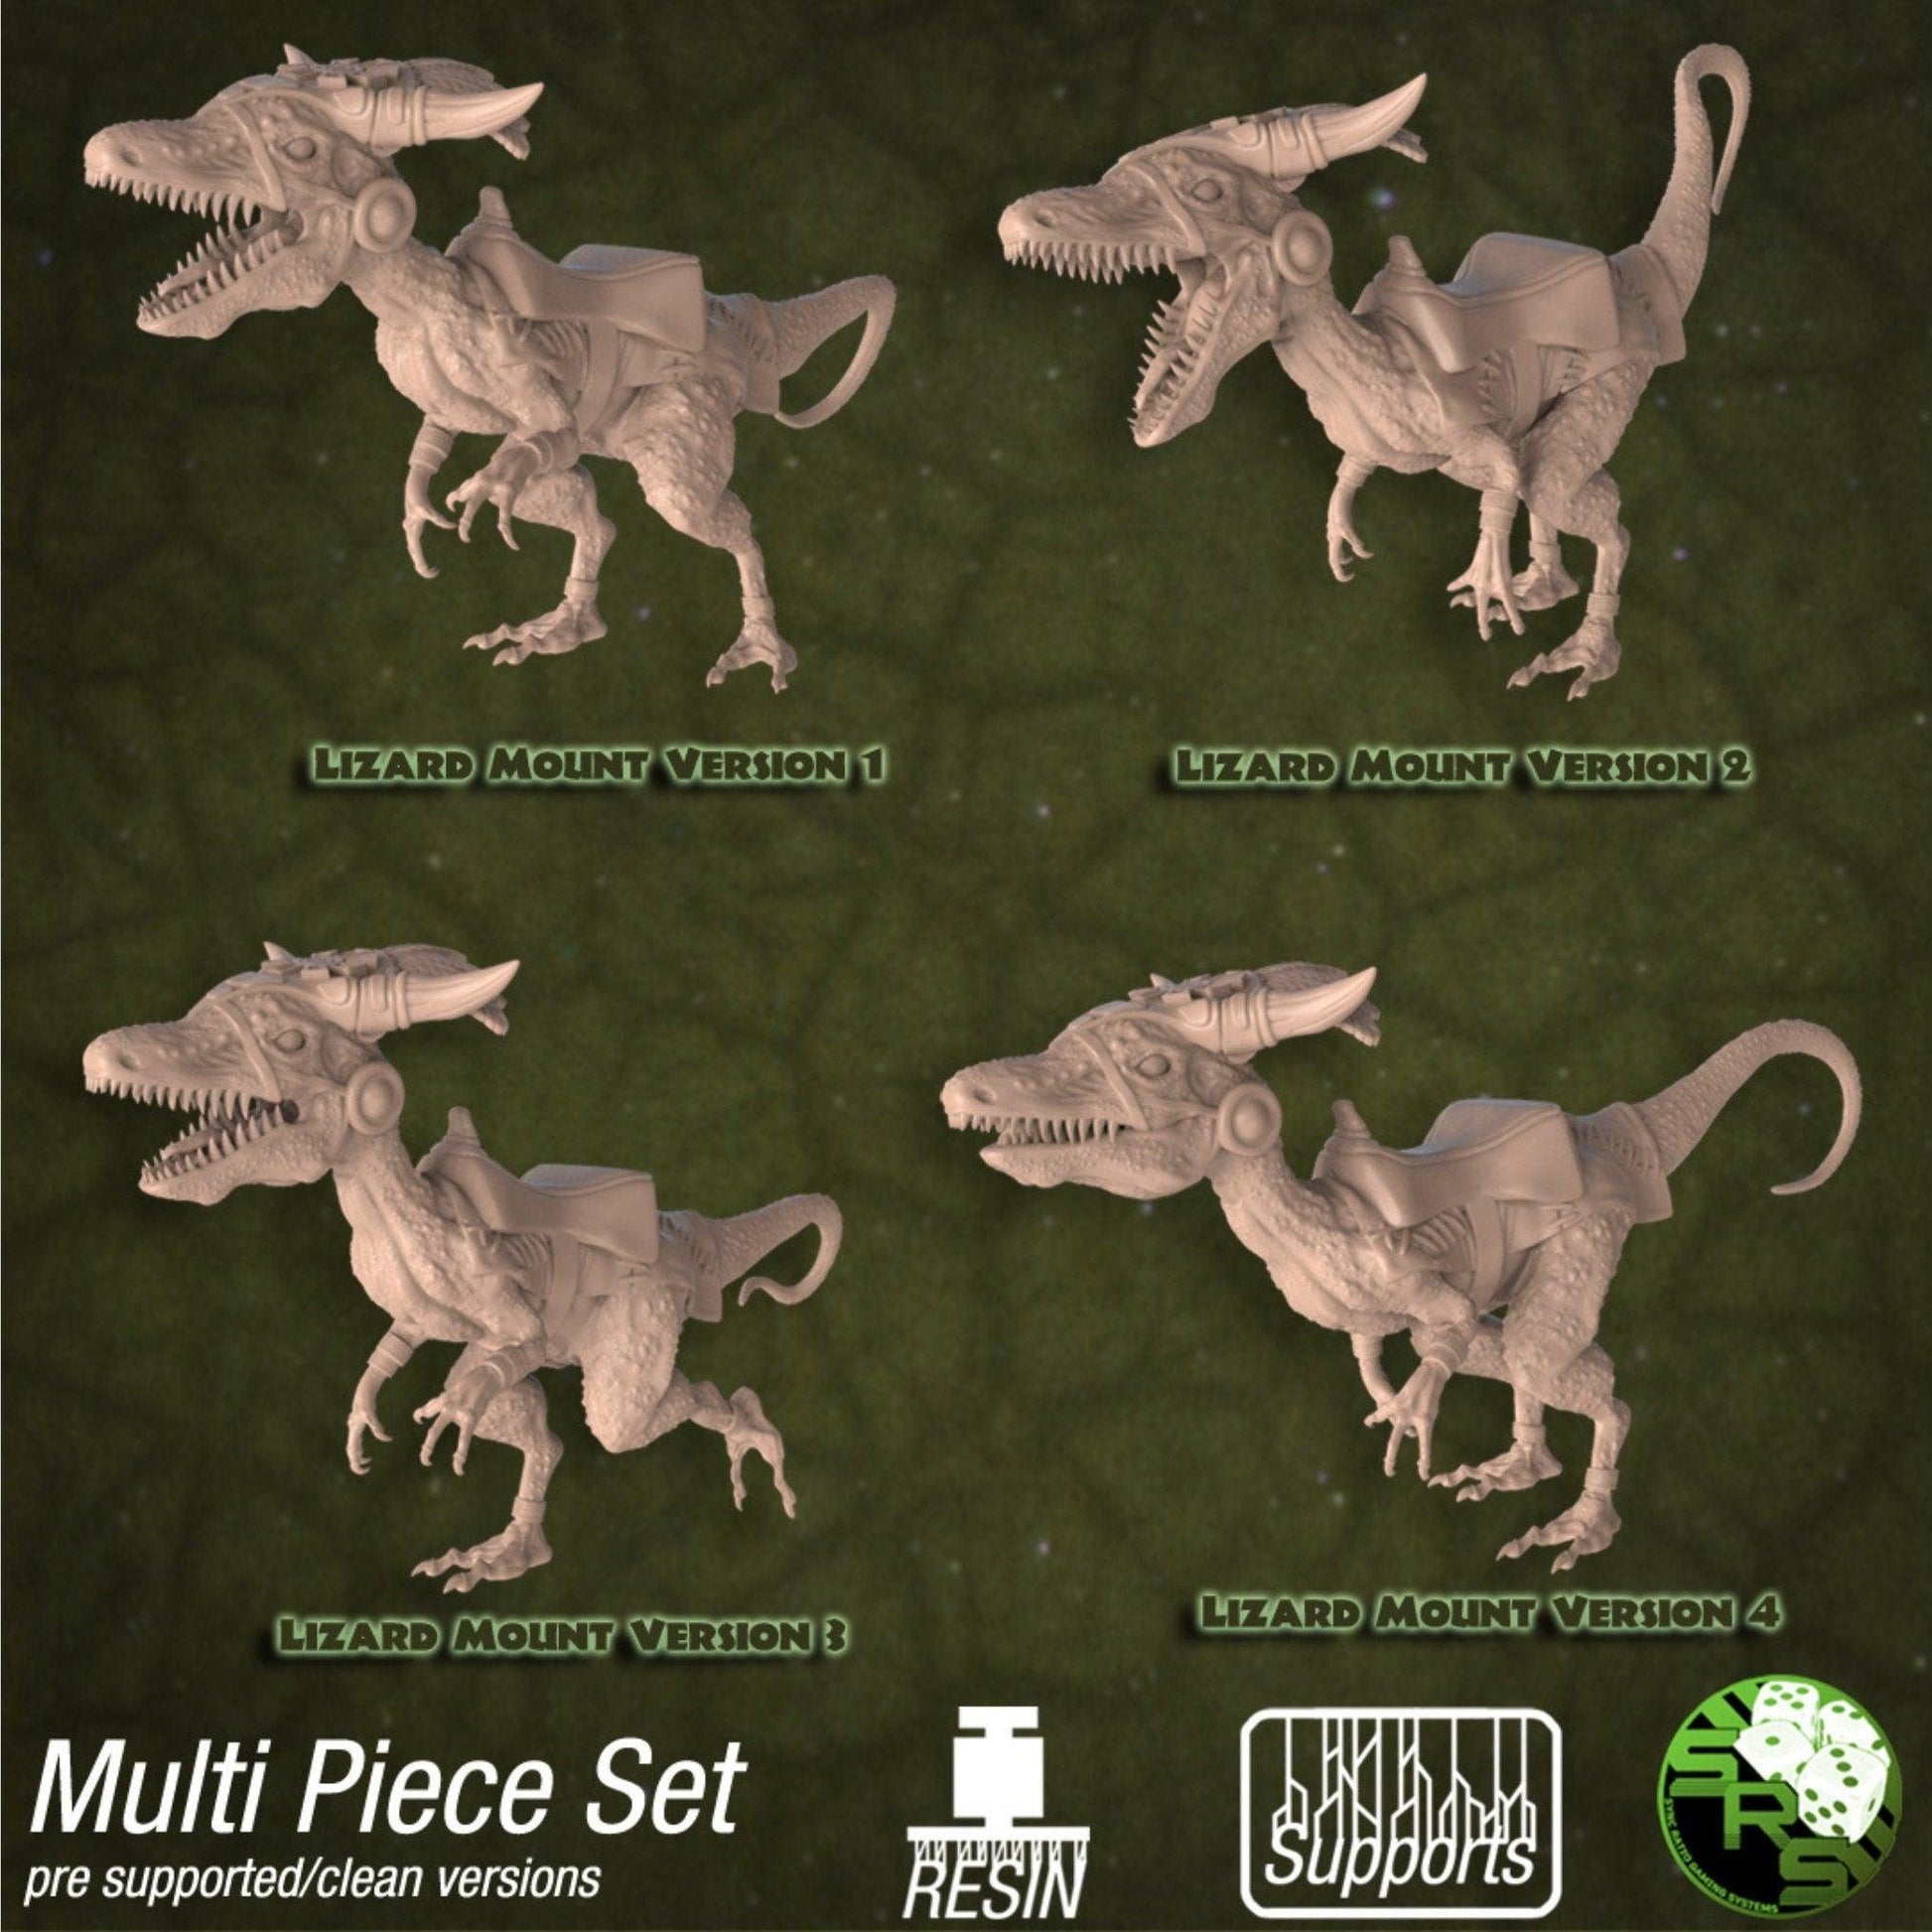 Lizard Mount - 25mm base | 32mm scale | Tabletop gaming DnD Miniature Dungeons and Dragons,dnd monster manual - Plague Miniatures shop for DnD Miniatures